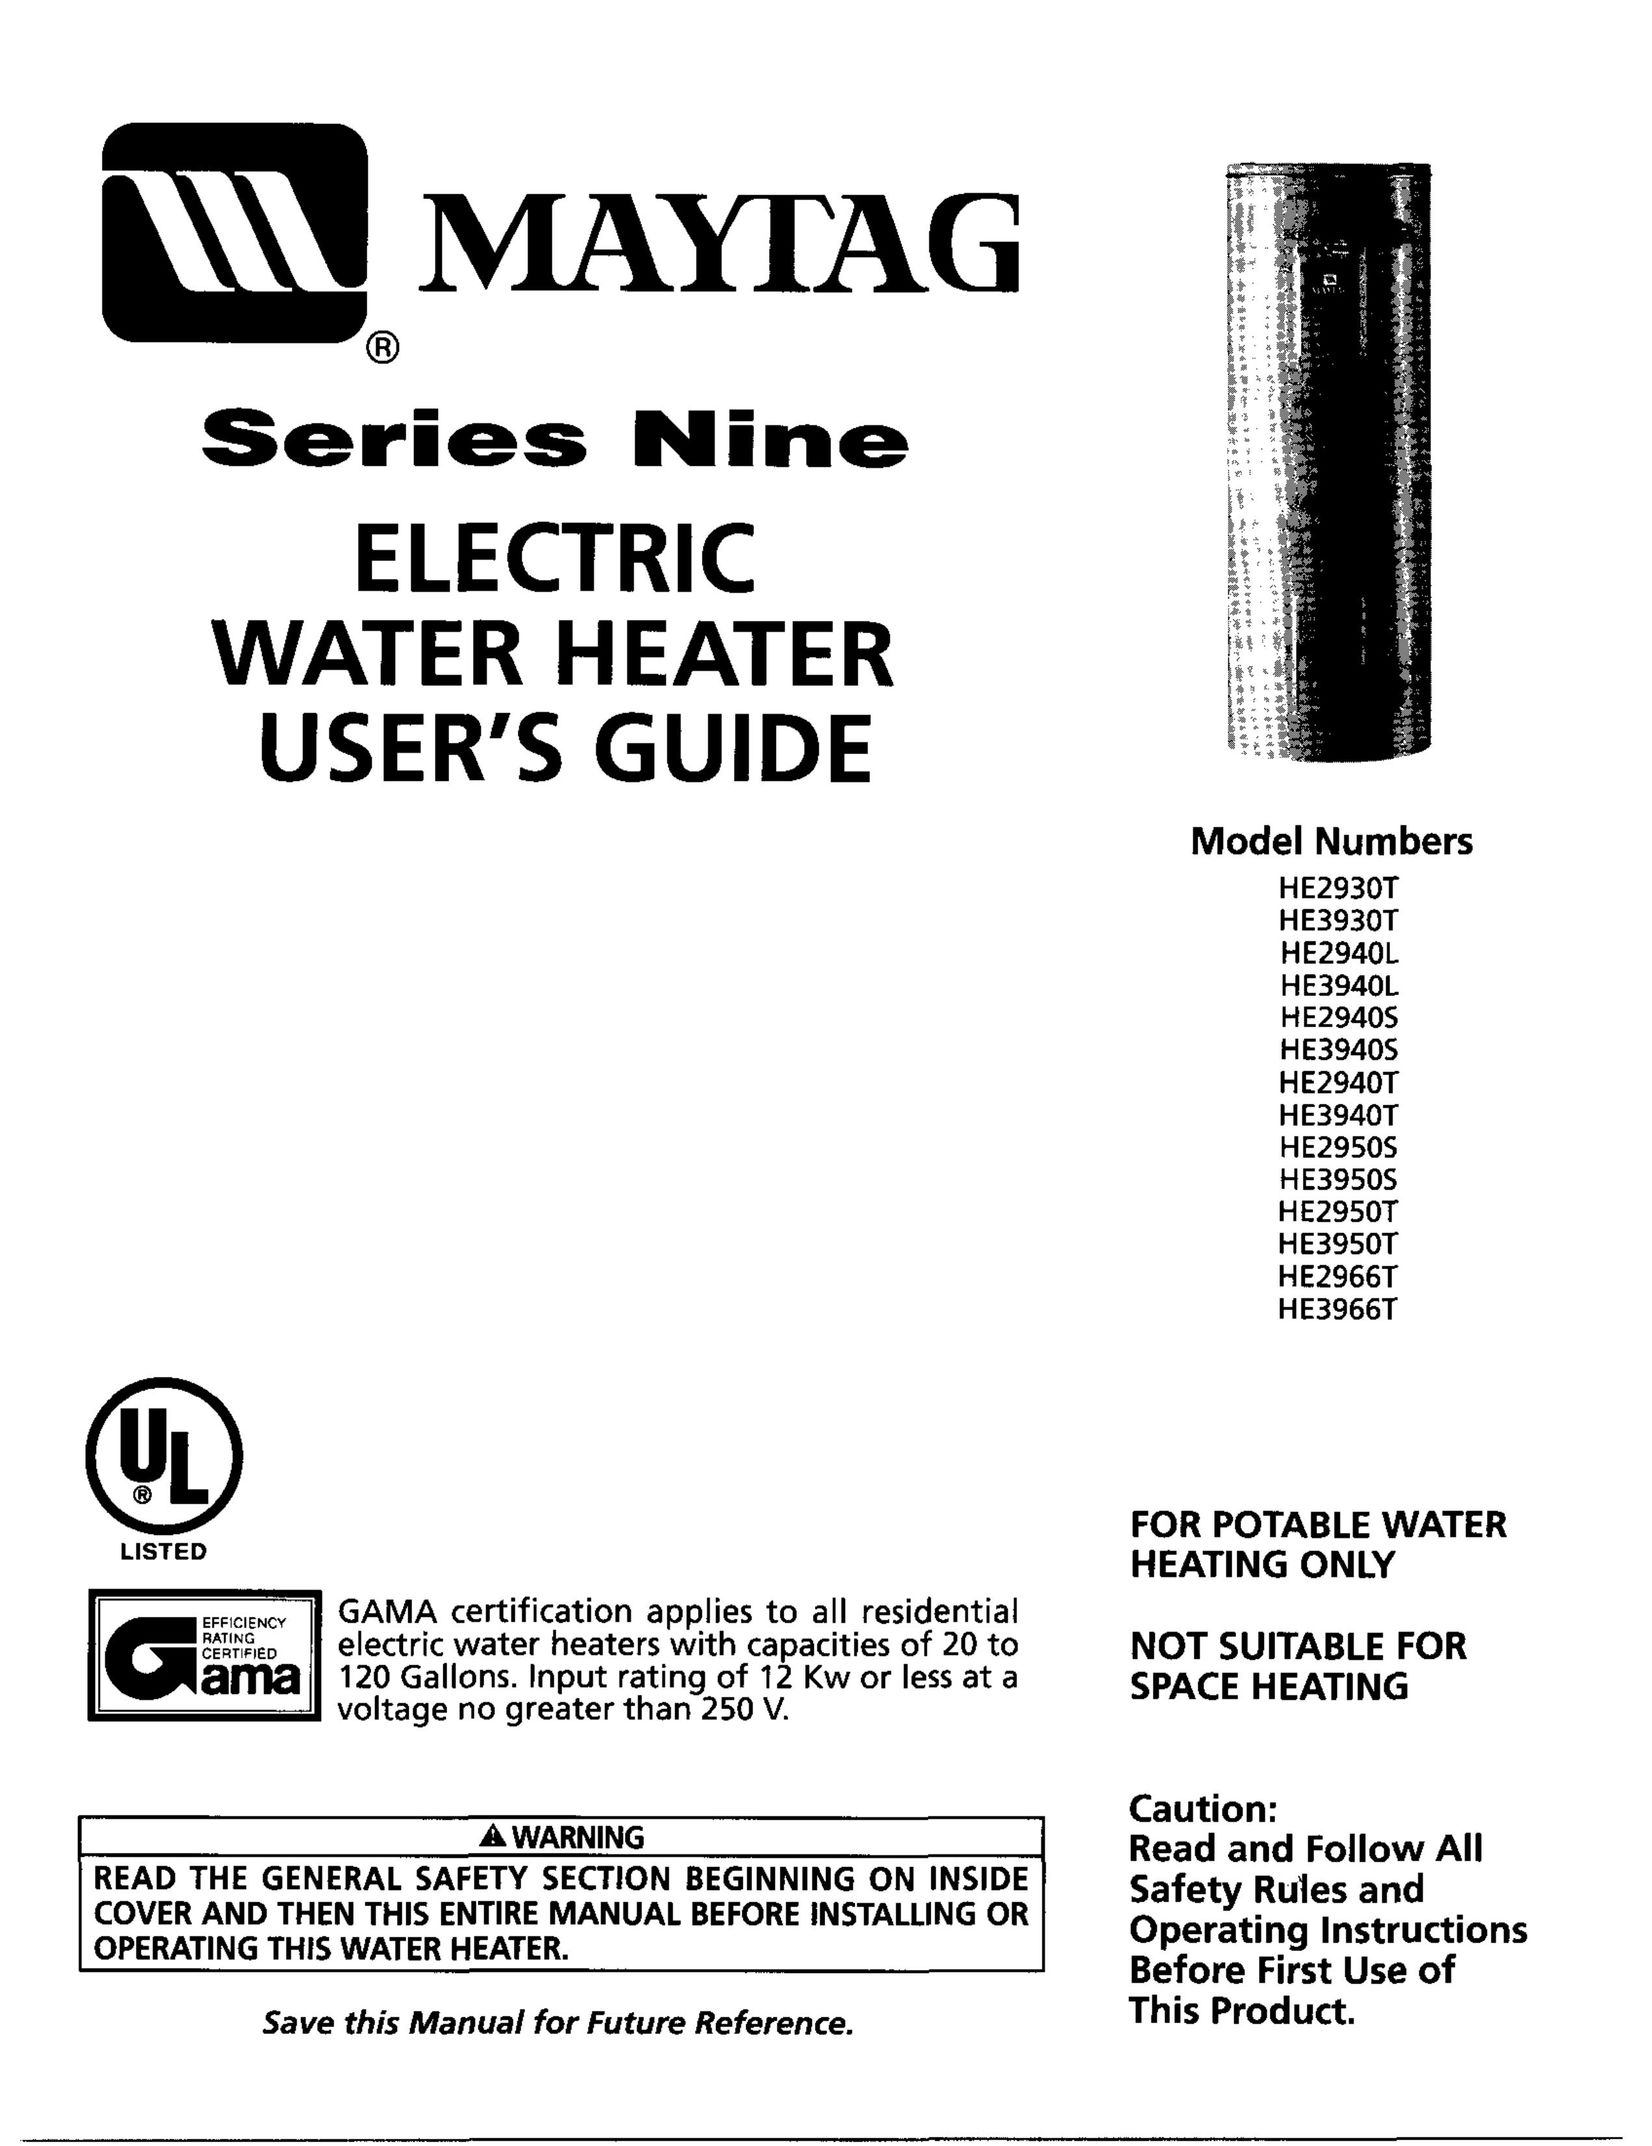 Maytag HE2940T Water Heater User Manual